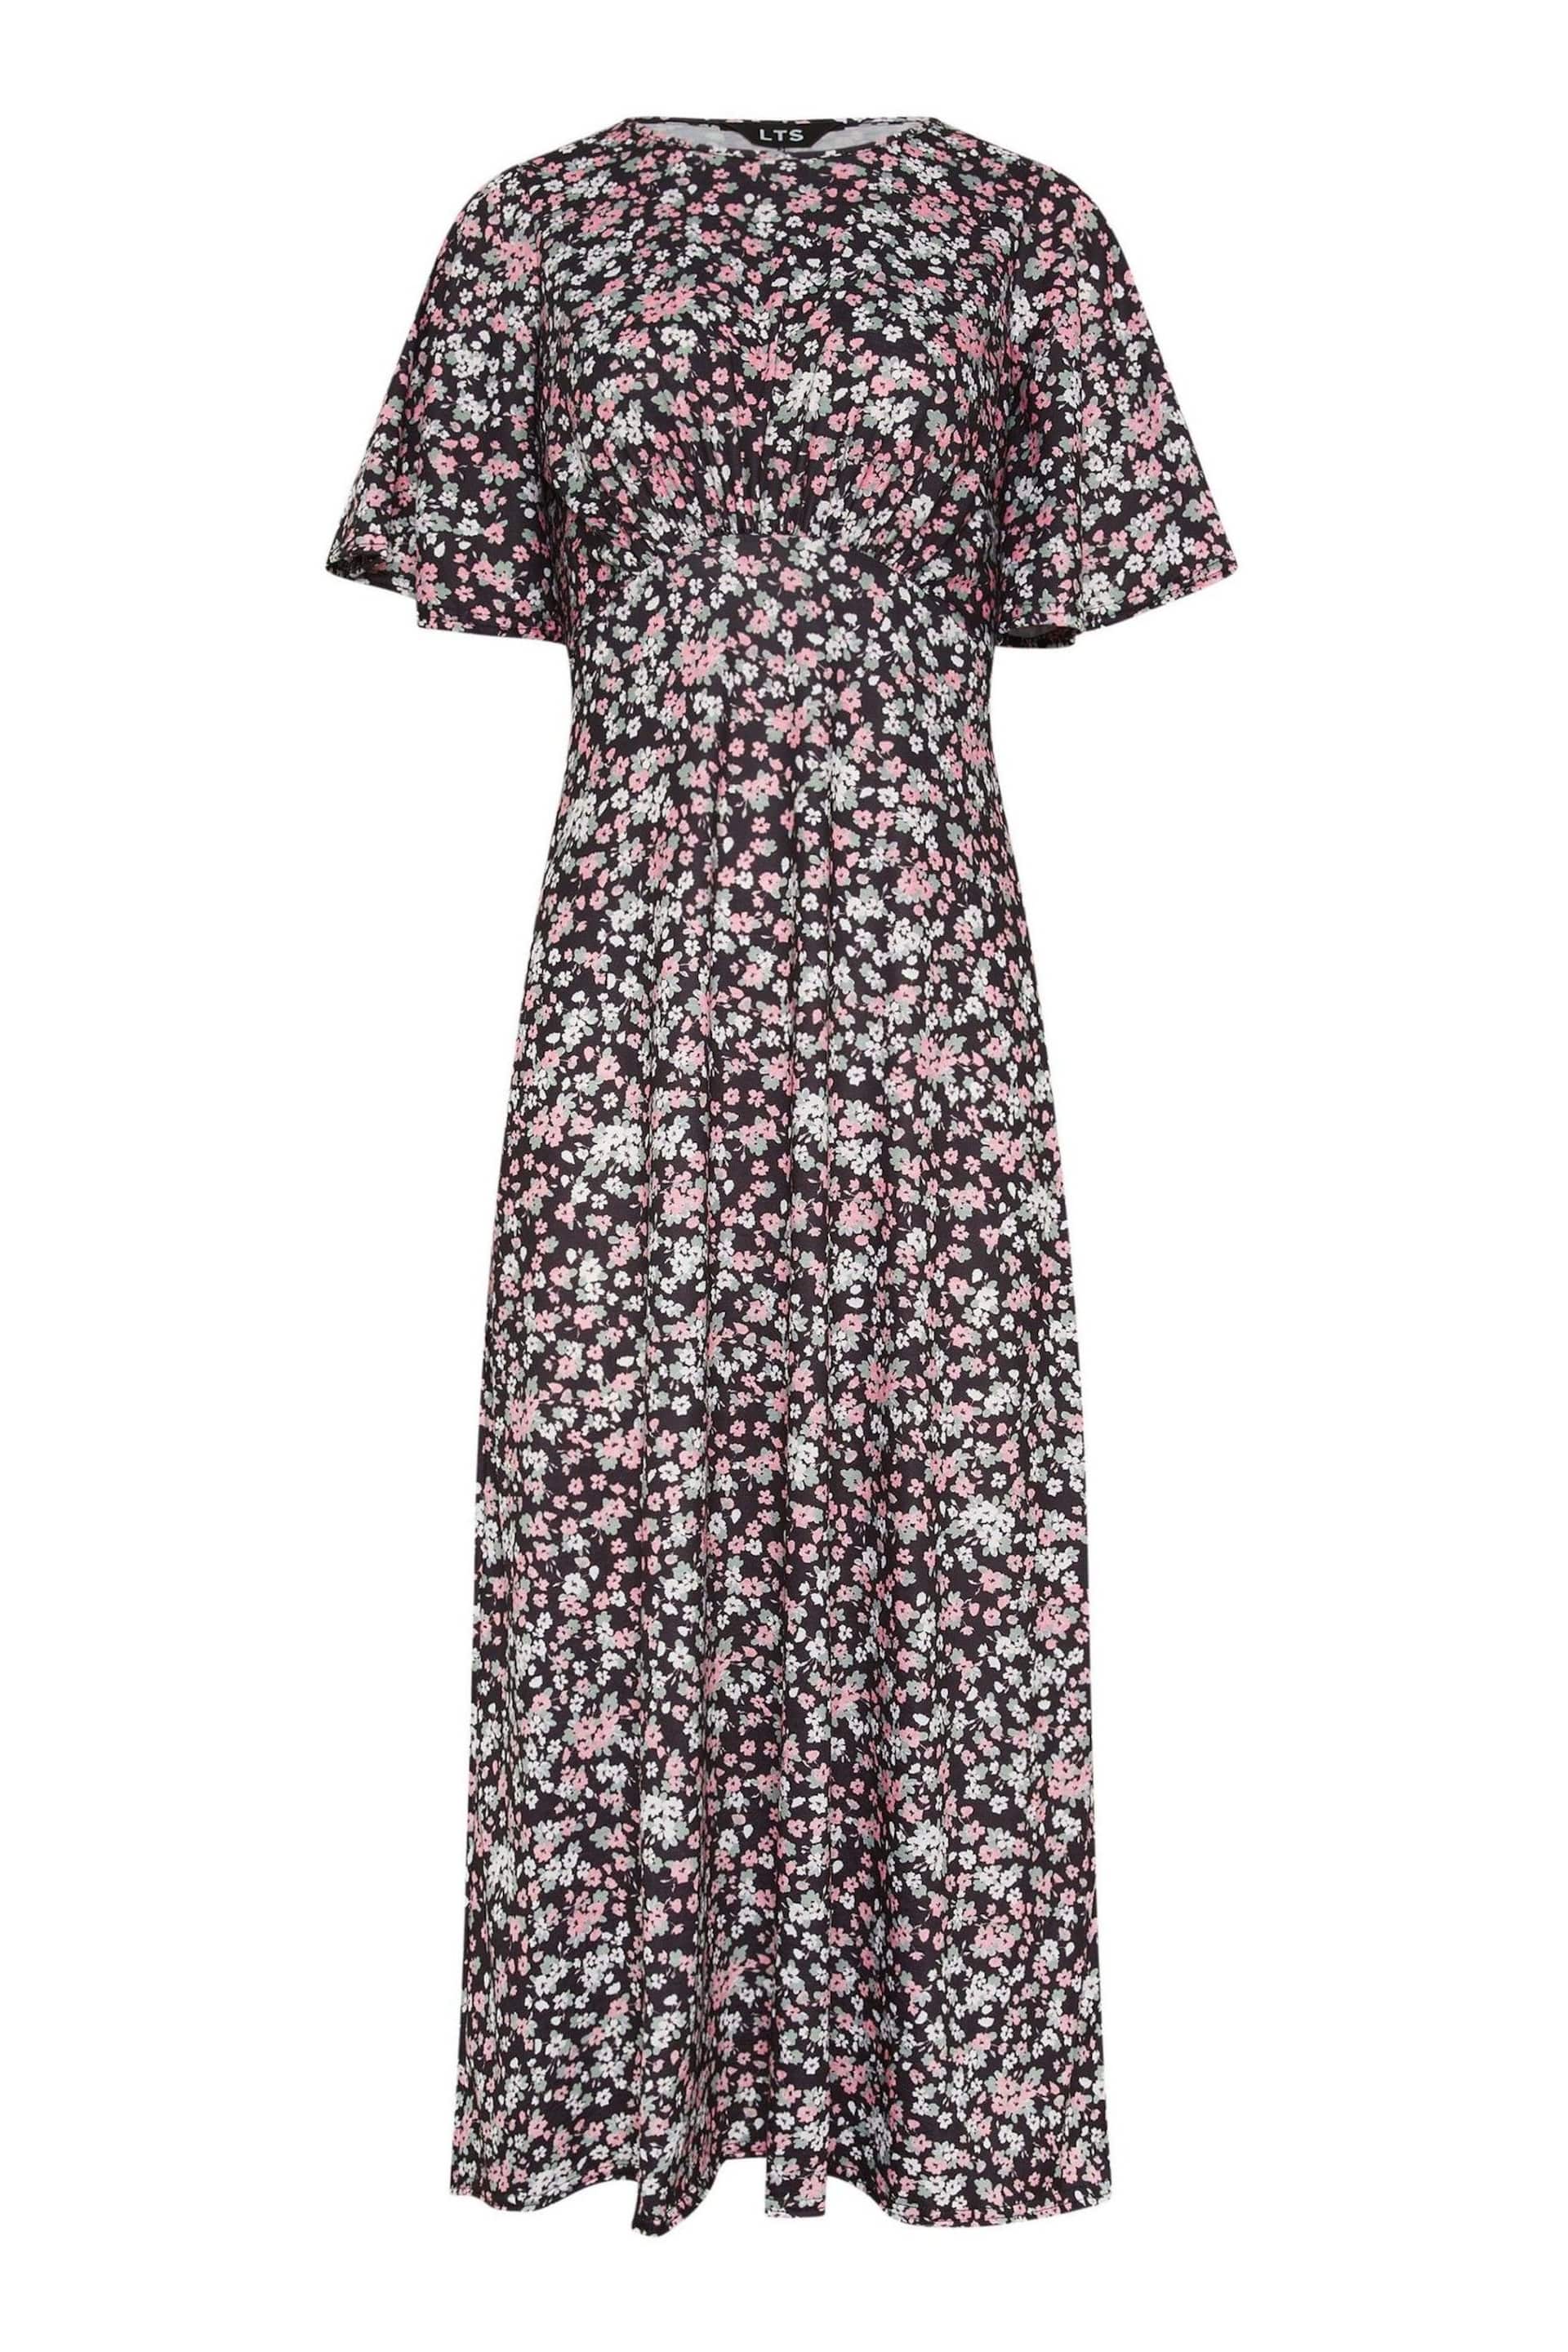 Long Tall Sally Multi Tall Ditsy Floral Midi Dress - Image 5 of 5